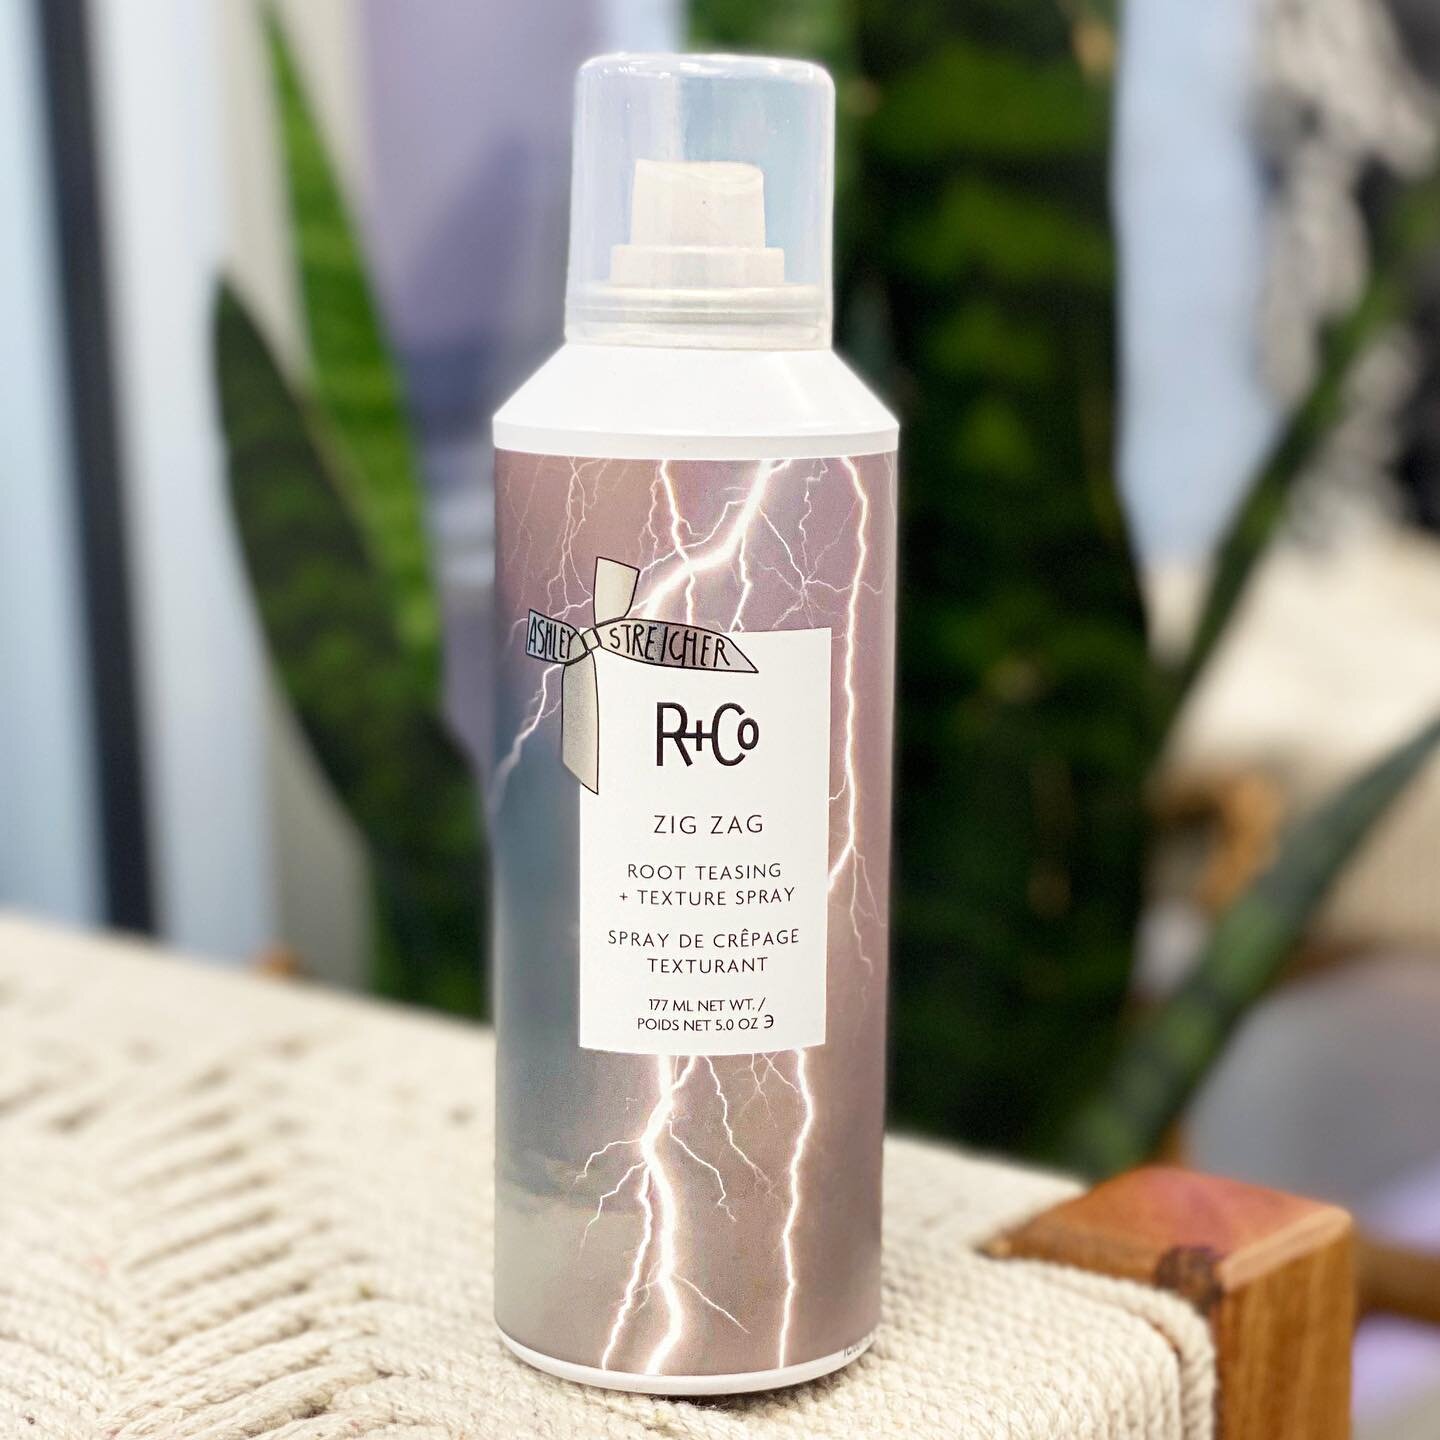 ZIG ZAG Root Teasing + Texture Spray 
➕➕➕➕➕➕➕➕➕➕➕➕
Literally my FAVORITE product right now! It smells like heaven and works like a dream! Currently in stock @coastalstylingstudio ✌️
➕➕➕➕➕➕➕➕➕➕➕➕➕
Teasing that&rsquo;s pleasing. This innovative, lightl